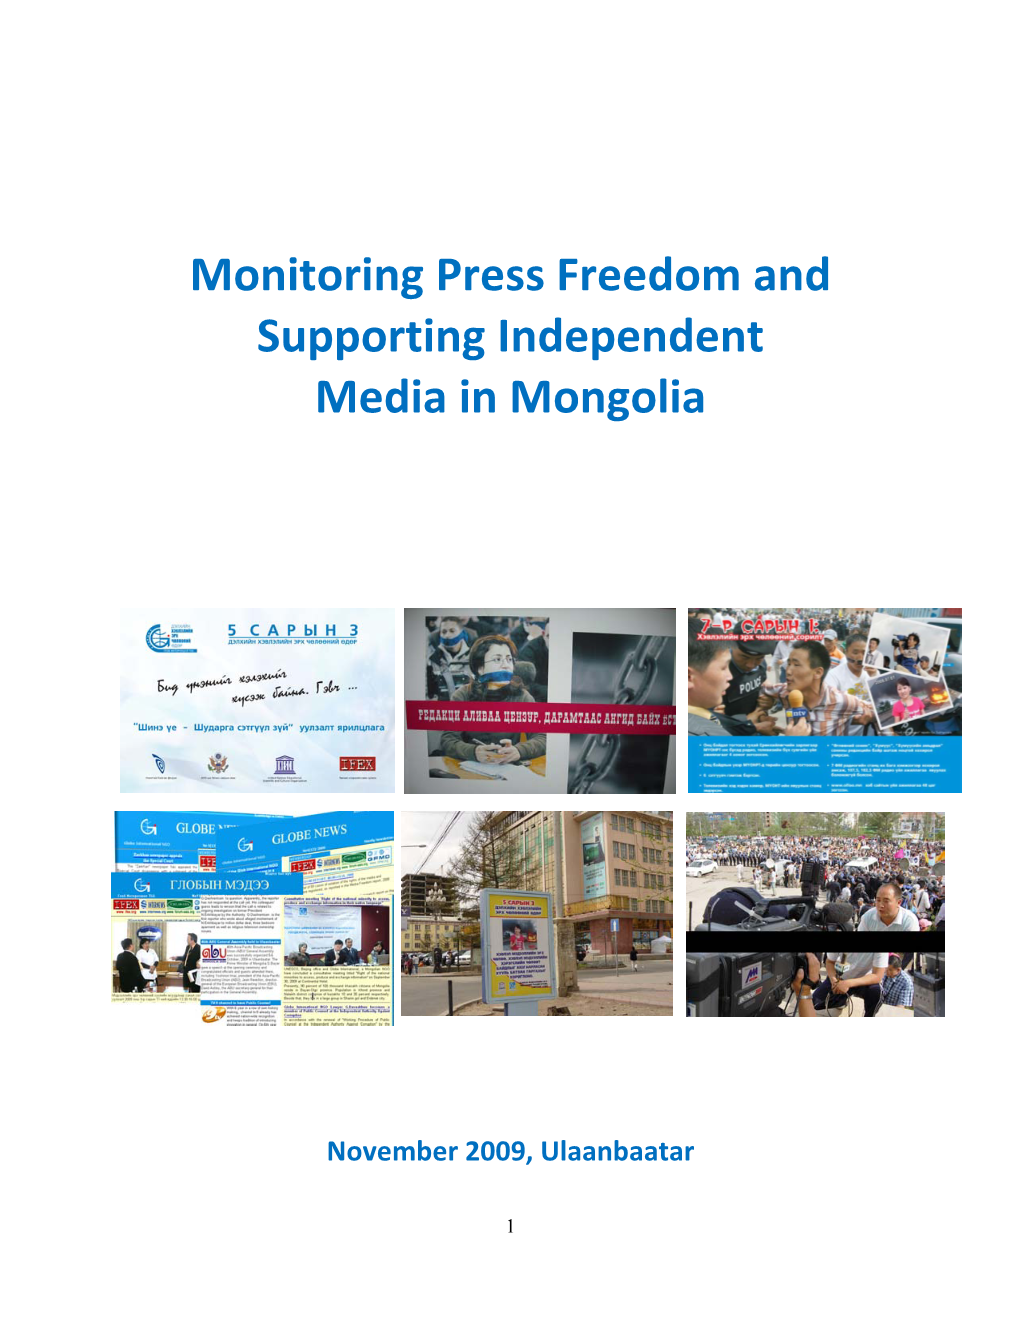 Monitoring Press Freedom and Supporting Independent Media in Mongolia